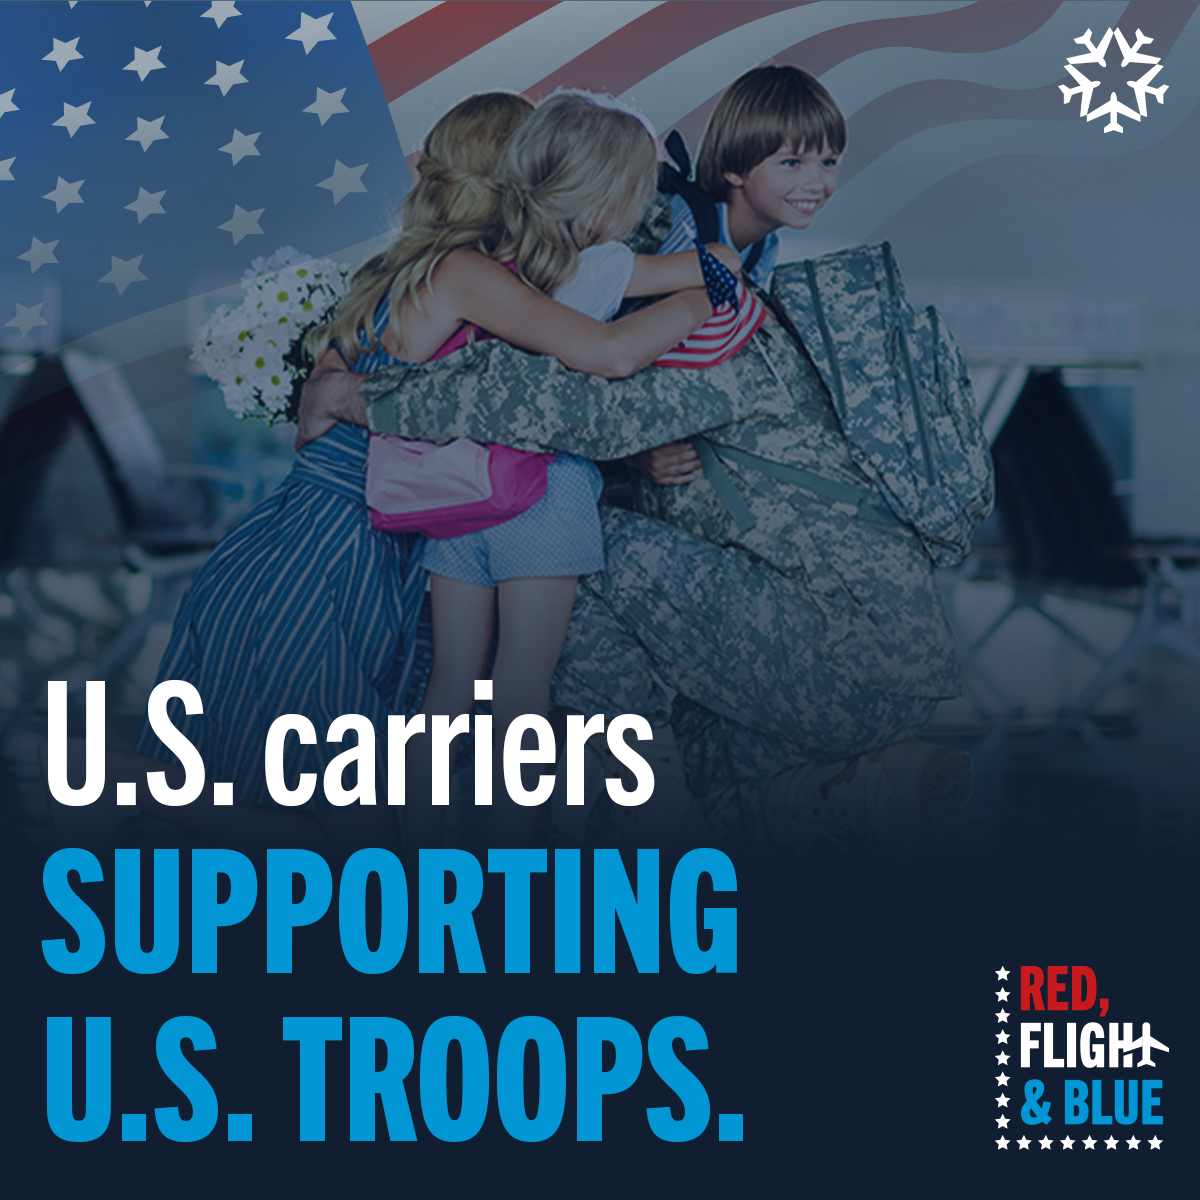 May is Military Appreciation Month and U.S. airlines greatly appreciate the service and sacrifice of all military members & their families. That’s why we proudly offer benefits to service members & their families when they fly. Learn more bit.ly/3JJS6qV #RedFlightAndBlue